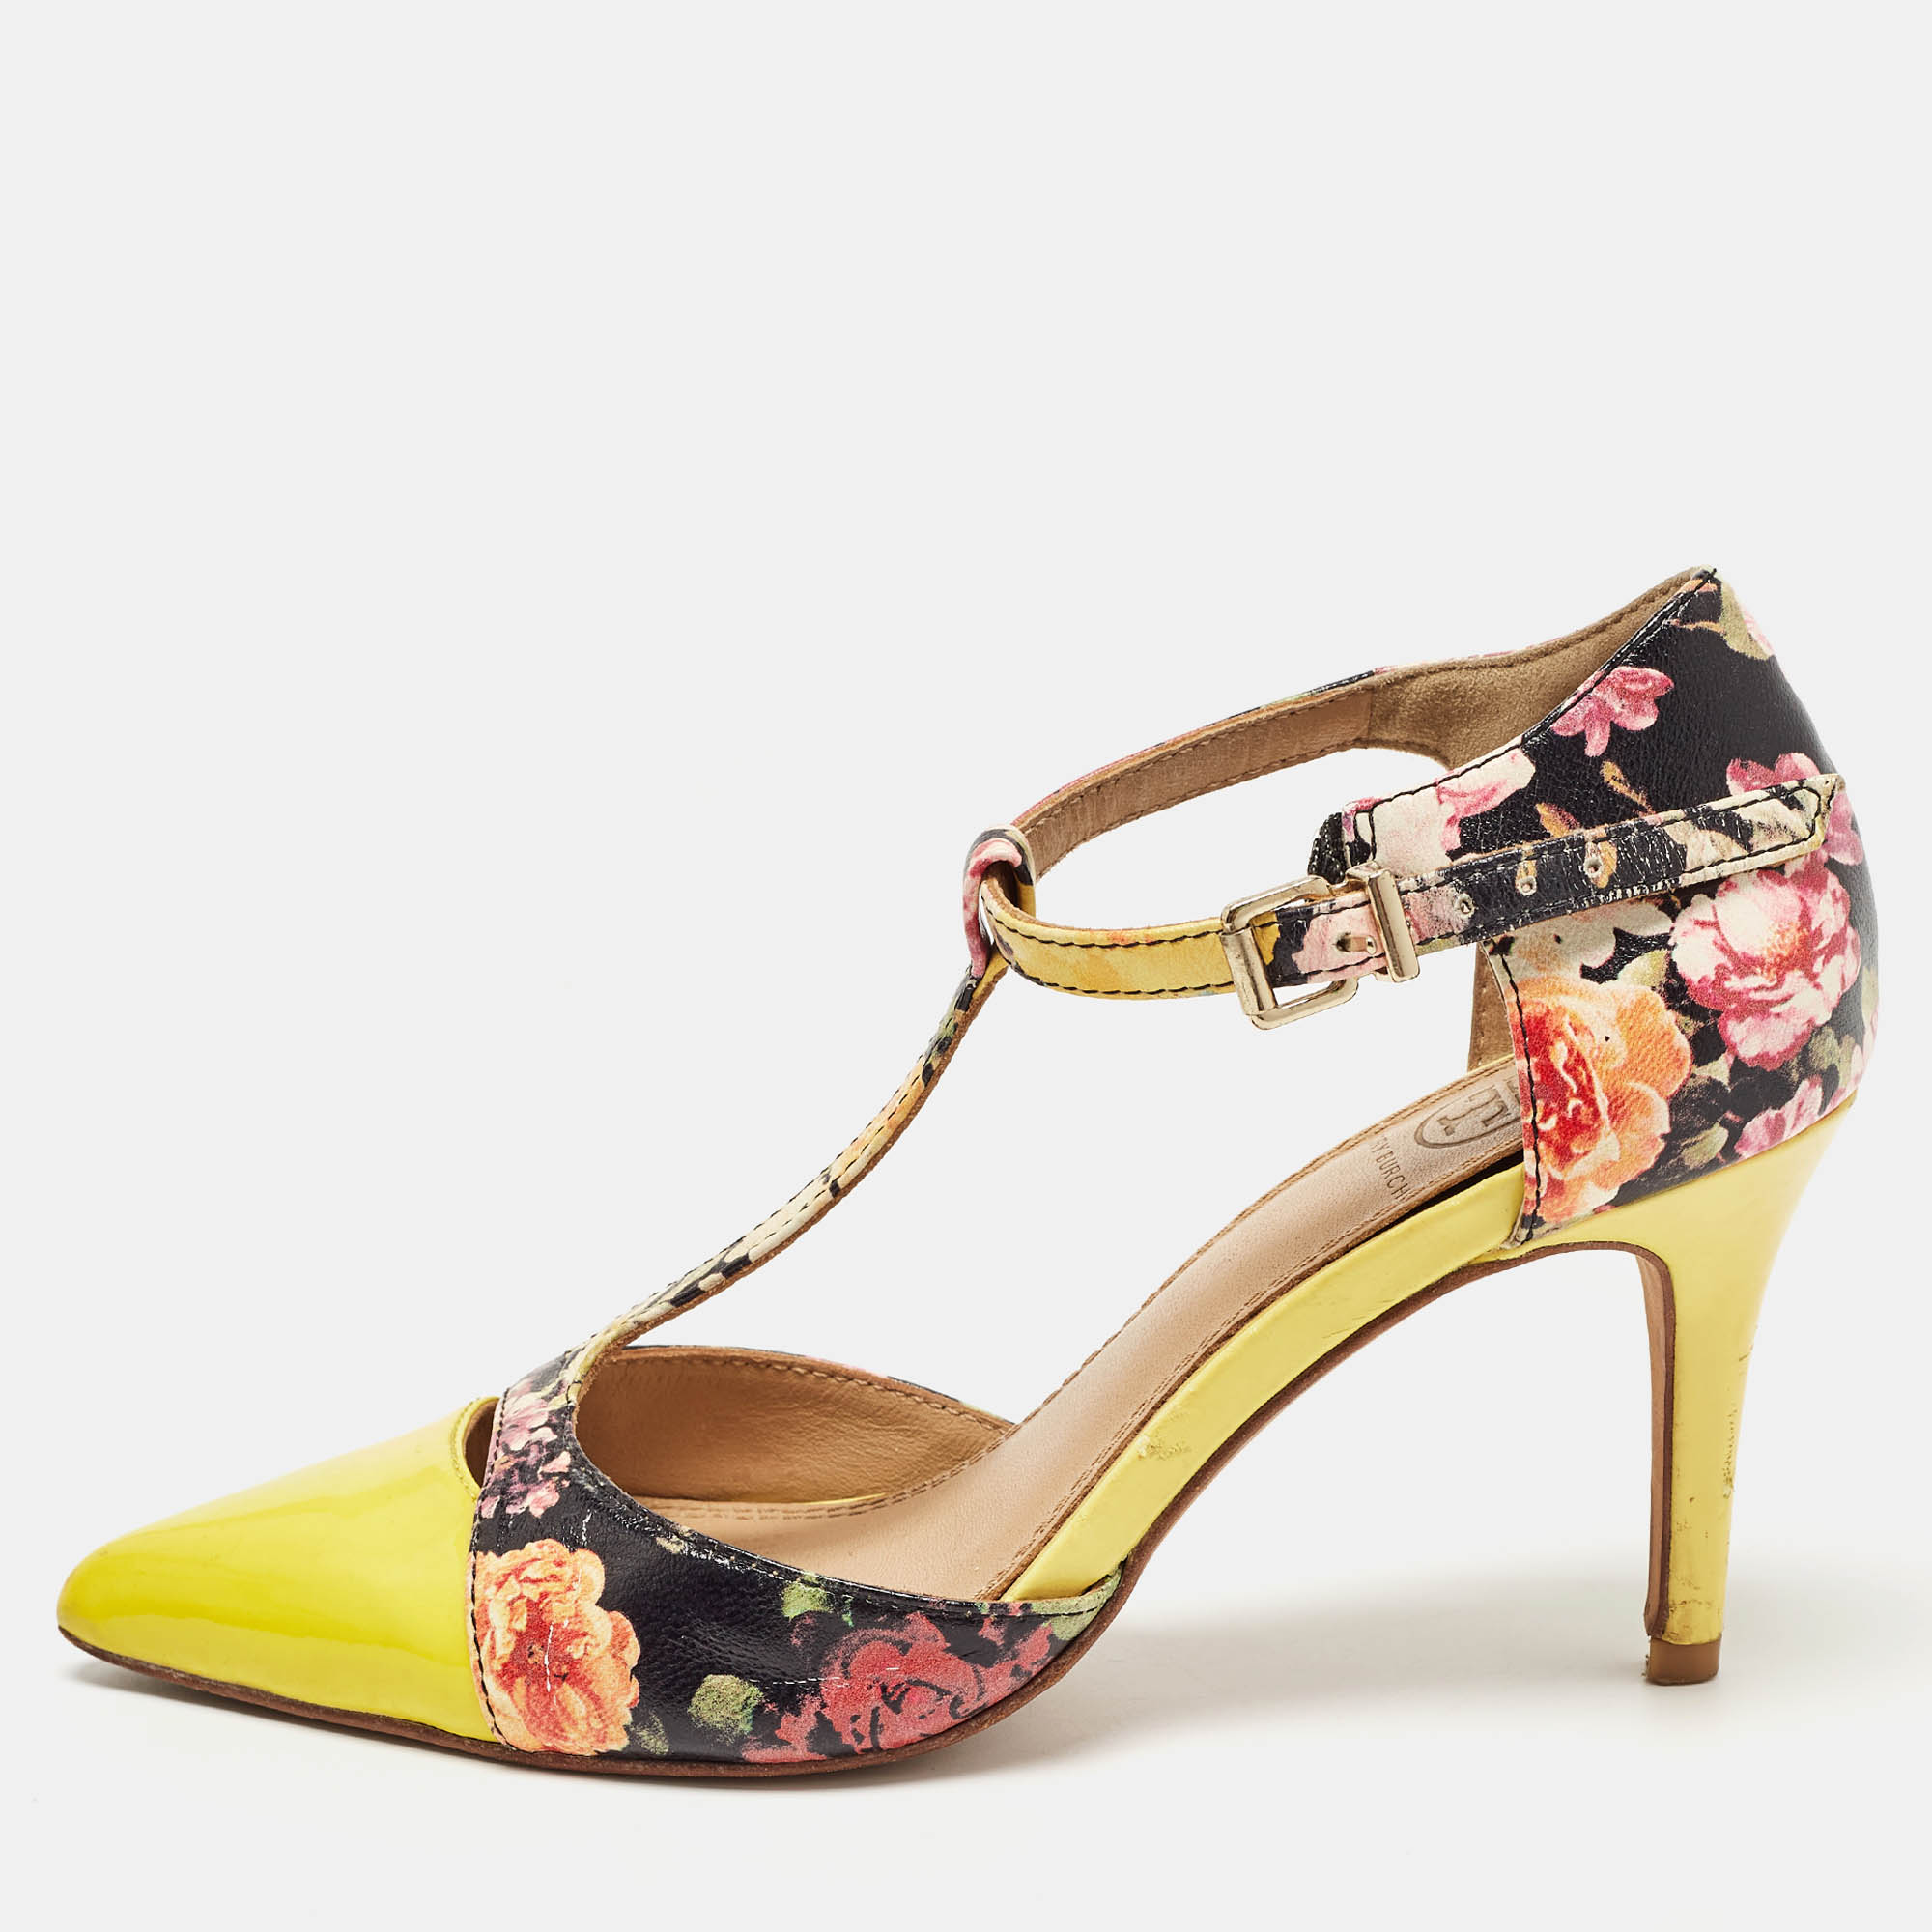 Tory burch multicolor floral print leather and patent ankle strap sandals size 36.5